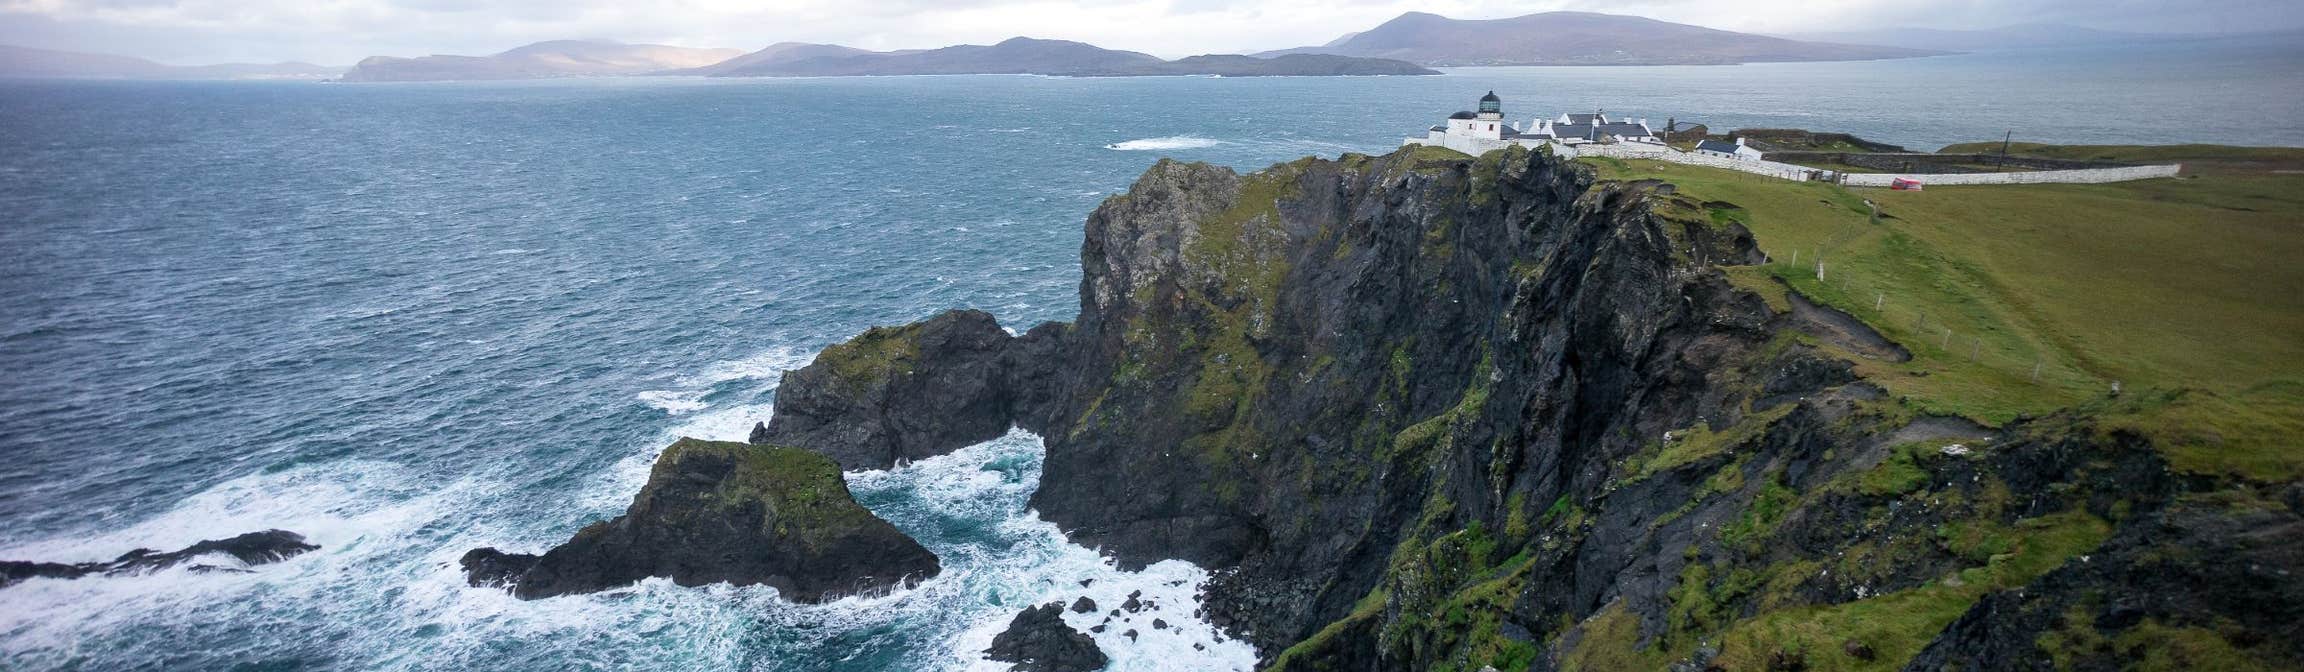 A lighthouse on the edge of a cliff on Clare Island in County Mayo